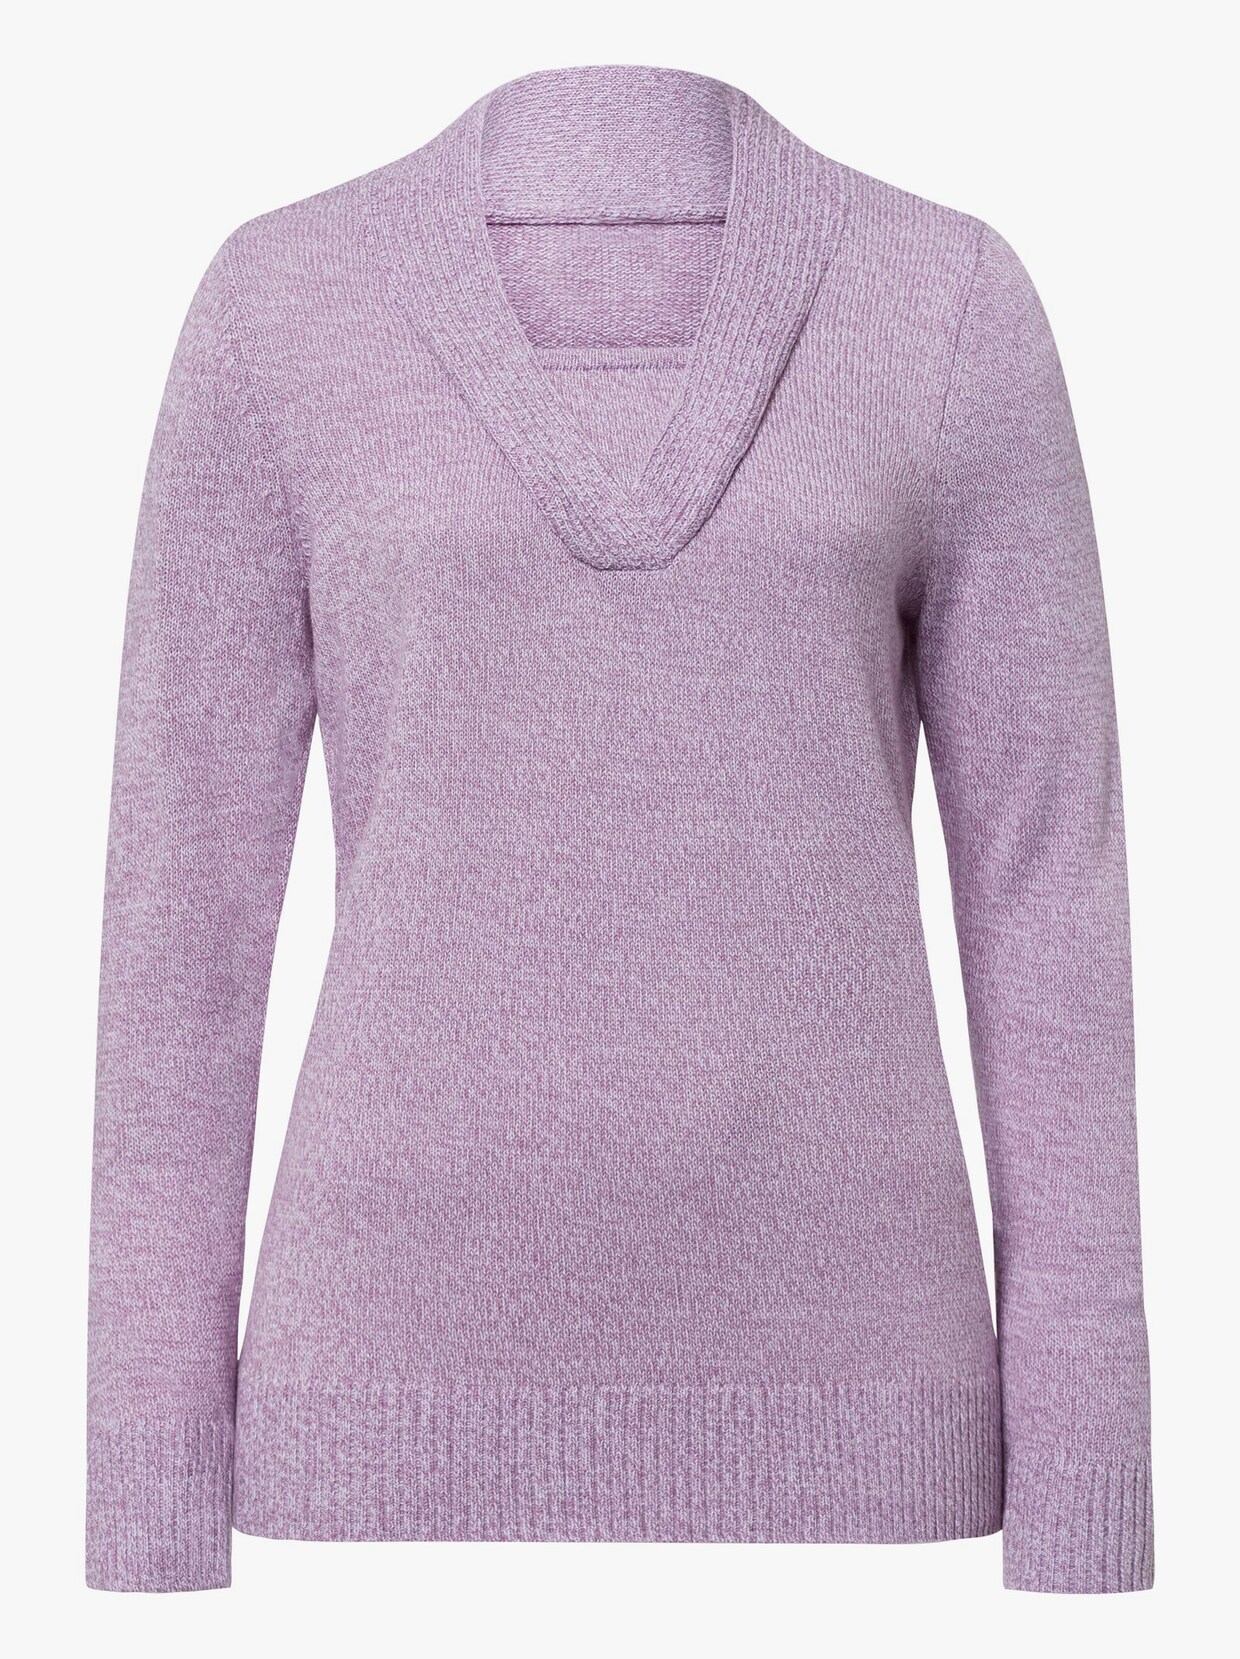 2-in-1-Pullover - orchidee-meliert